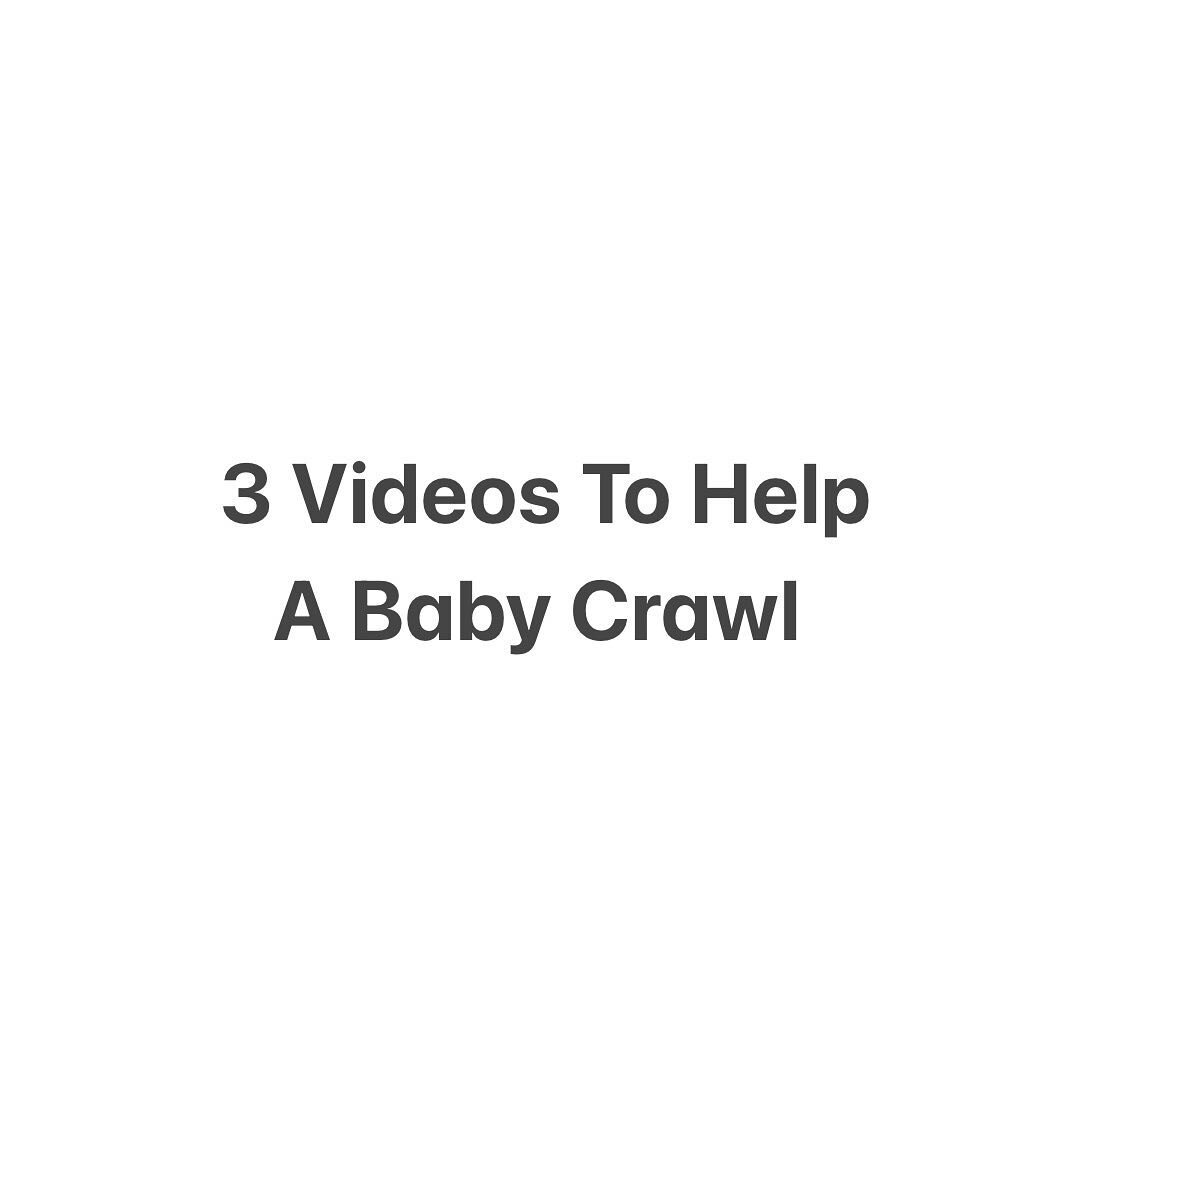 These three videos are part of the &ldquo;Learning to Crawl&rdquo; playlist on youtube over at www.youtube.com/drlaurenbaker or by going to the link in bio to youtube channel and clicking on the Learning to Crawl playlist. 

Drop a comment on a video